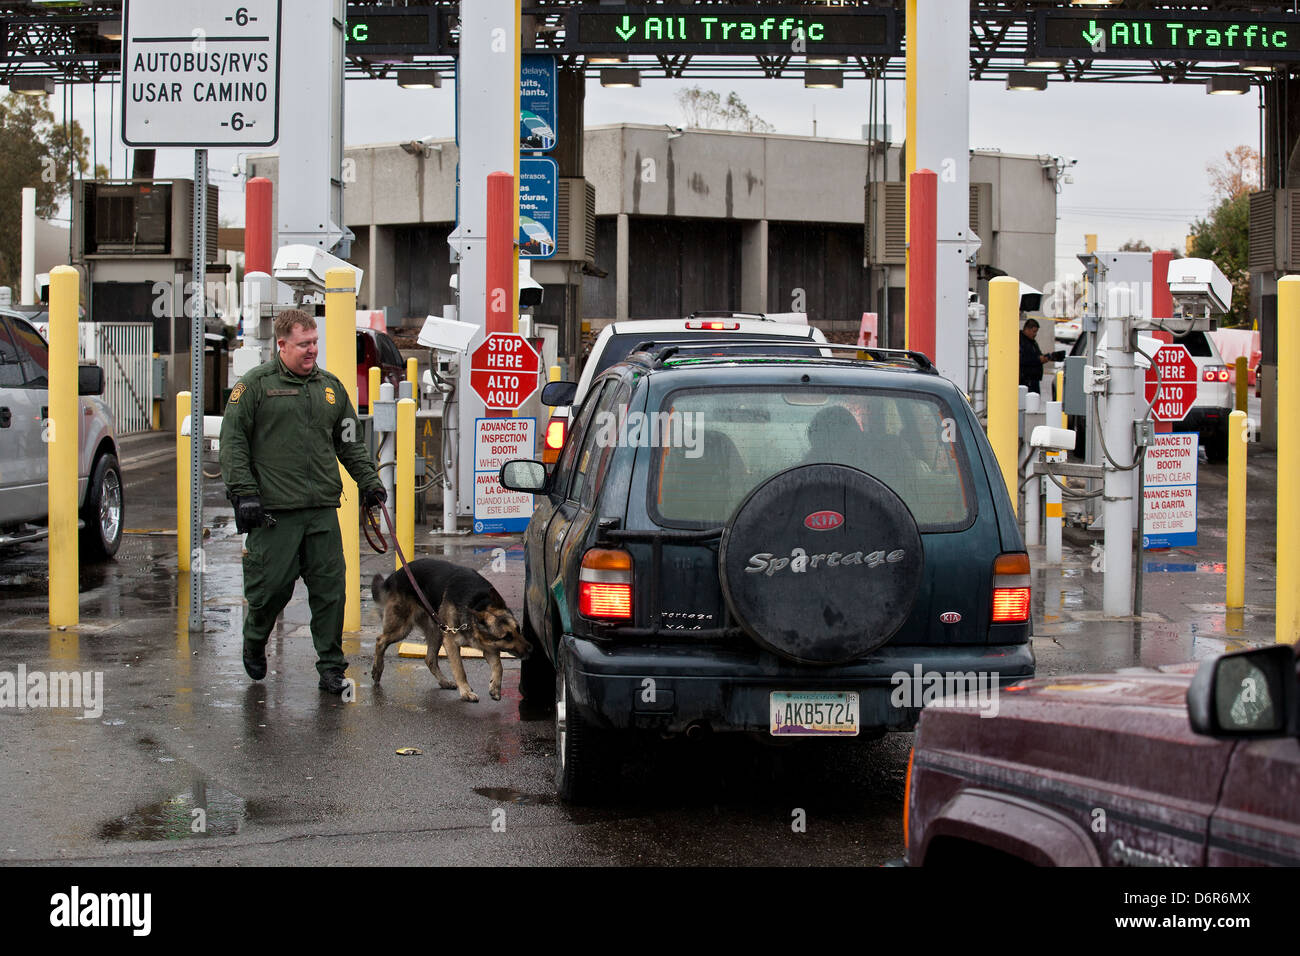 A US Customs and Border Protection officer inspects vehicles using a sniffer dog at the immigration check point for vehicles entering the USA at the San Luis border crossing February 16, 2012 in San Luis, AZ. Stock Photo